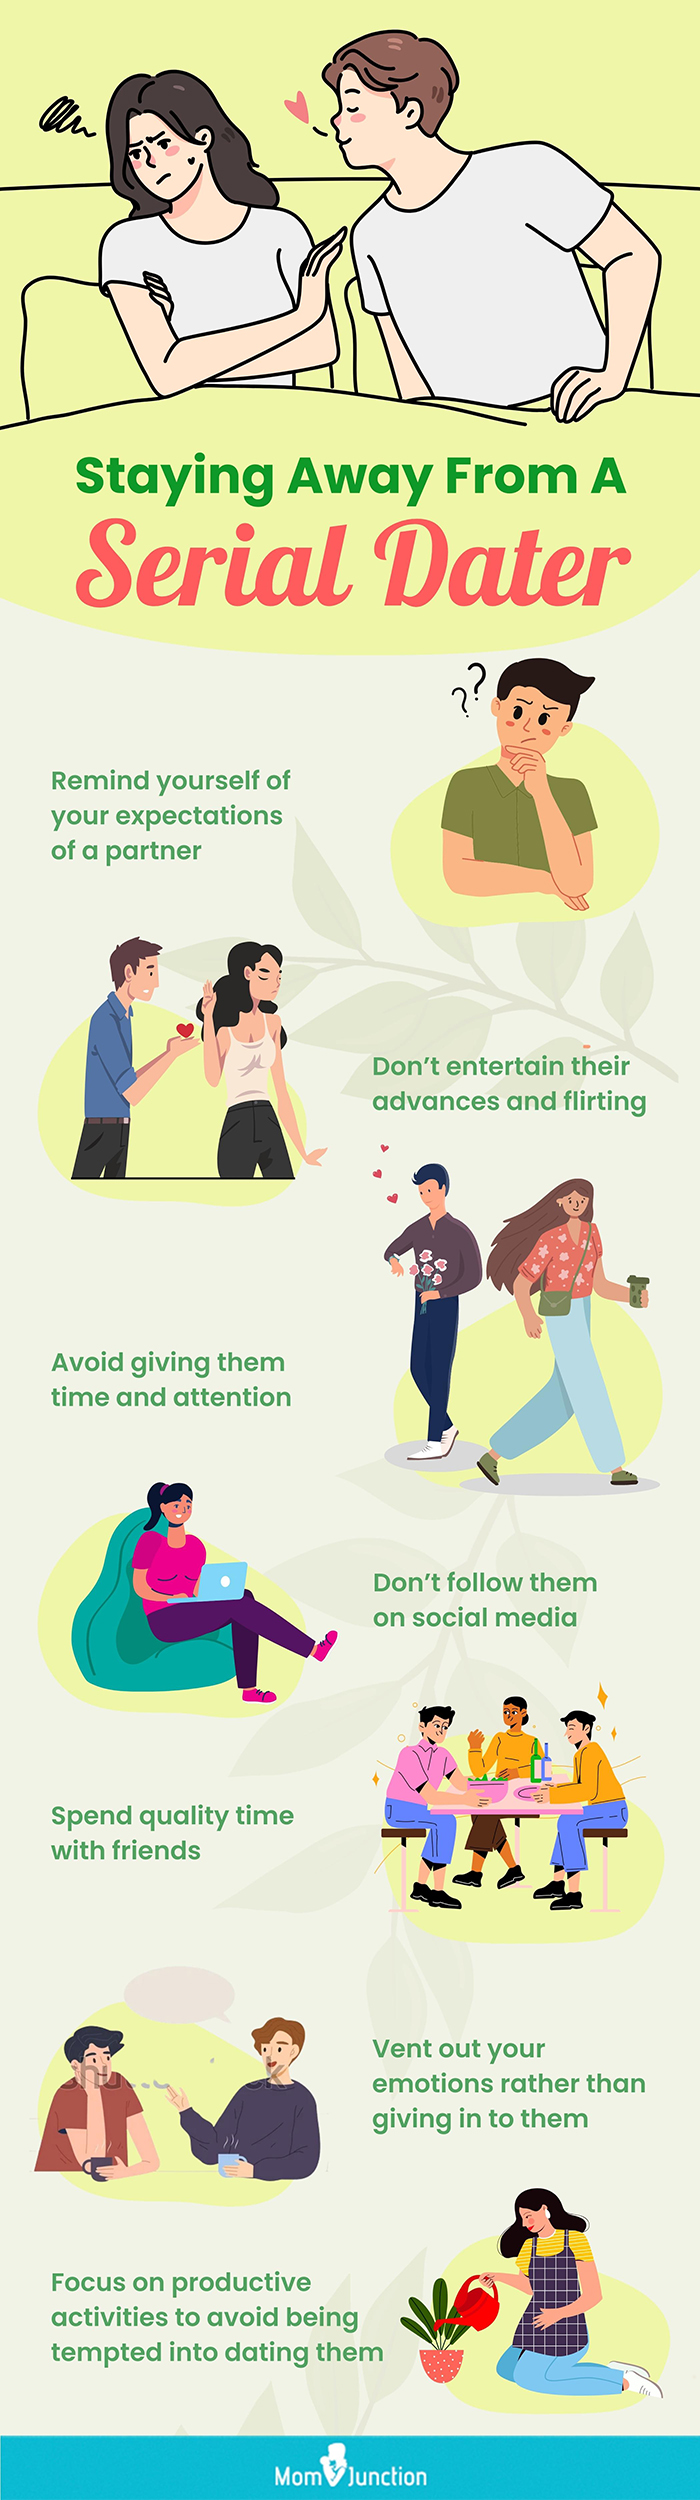 tips for staying away from a serial dater (infographic)